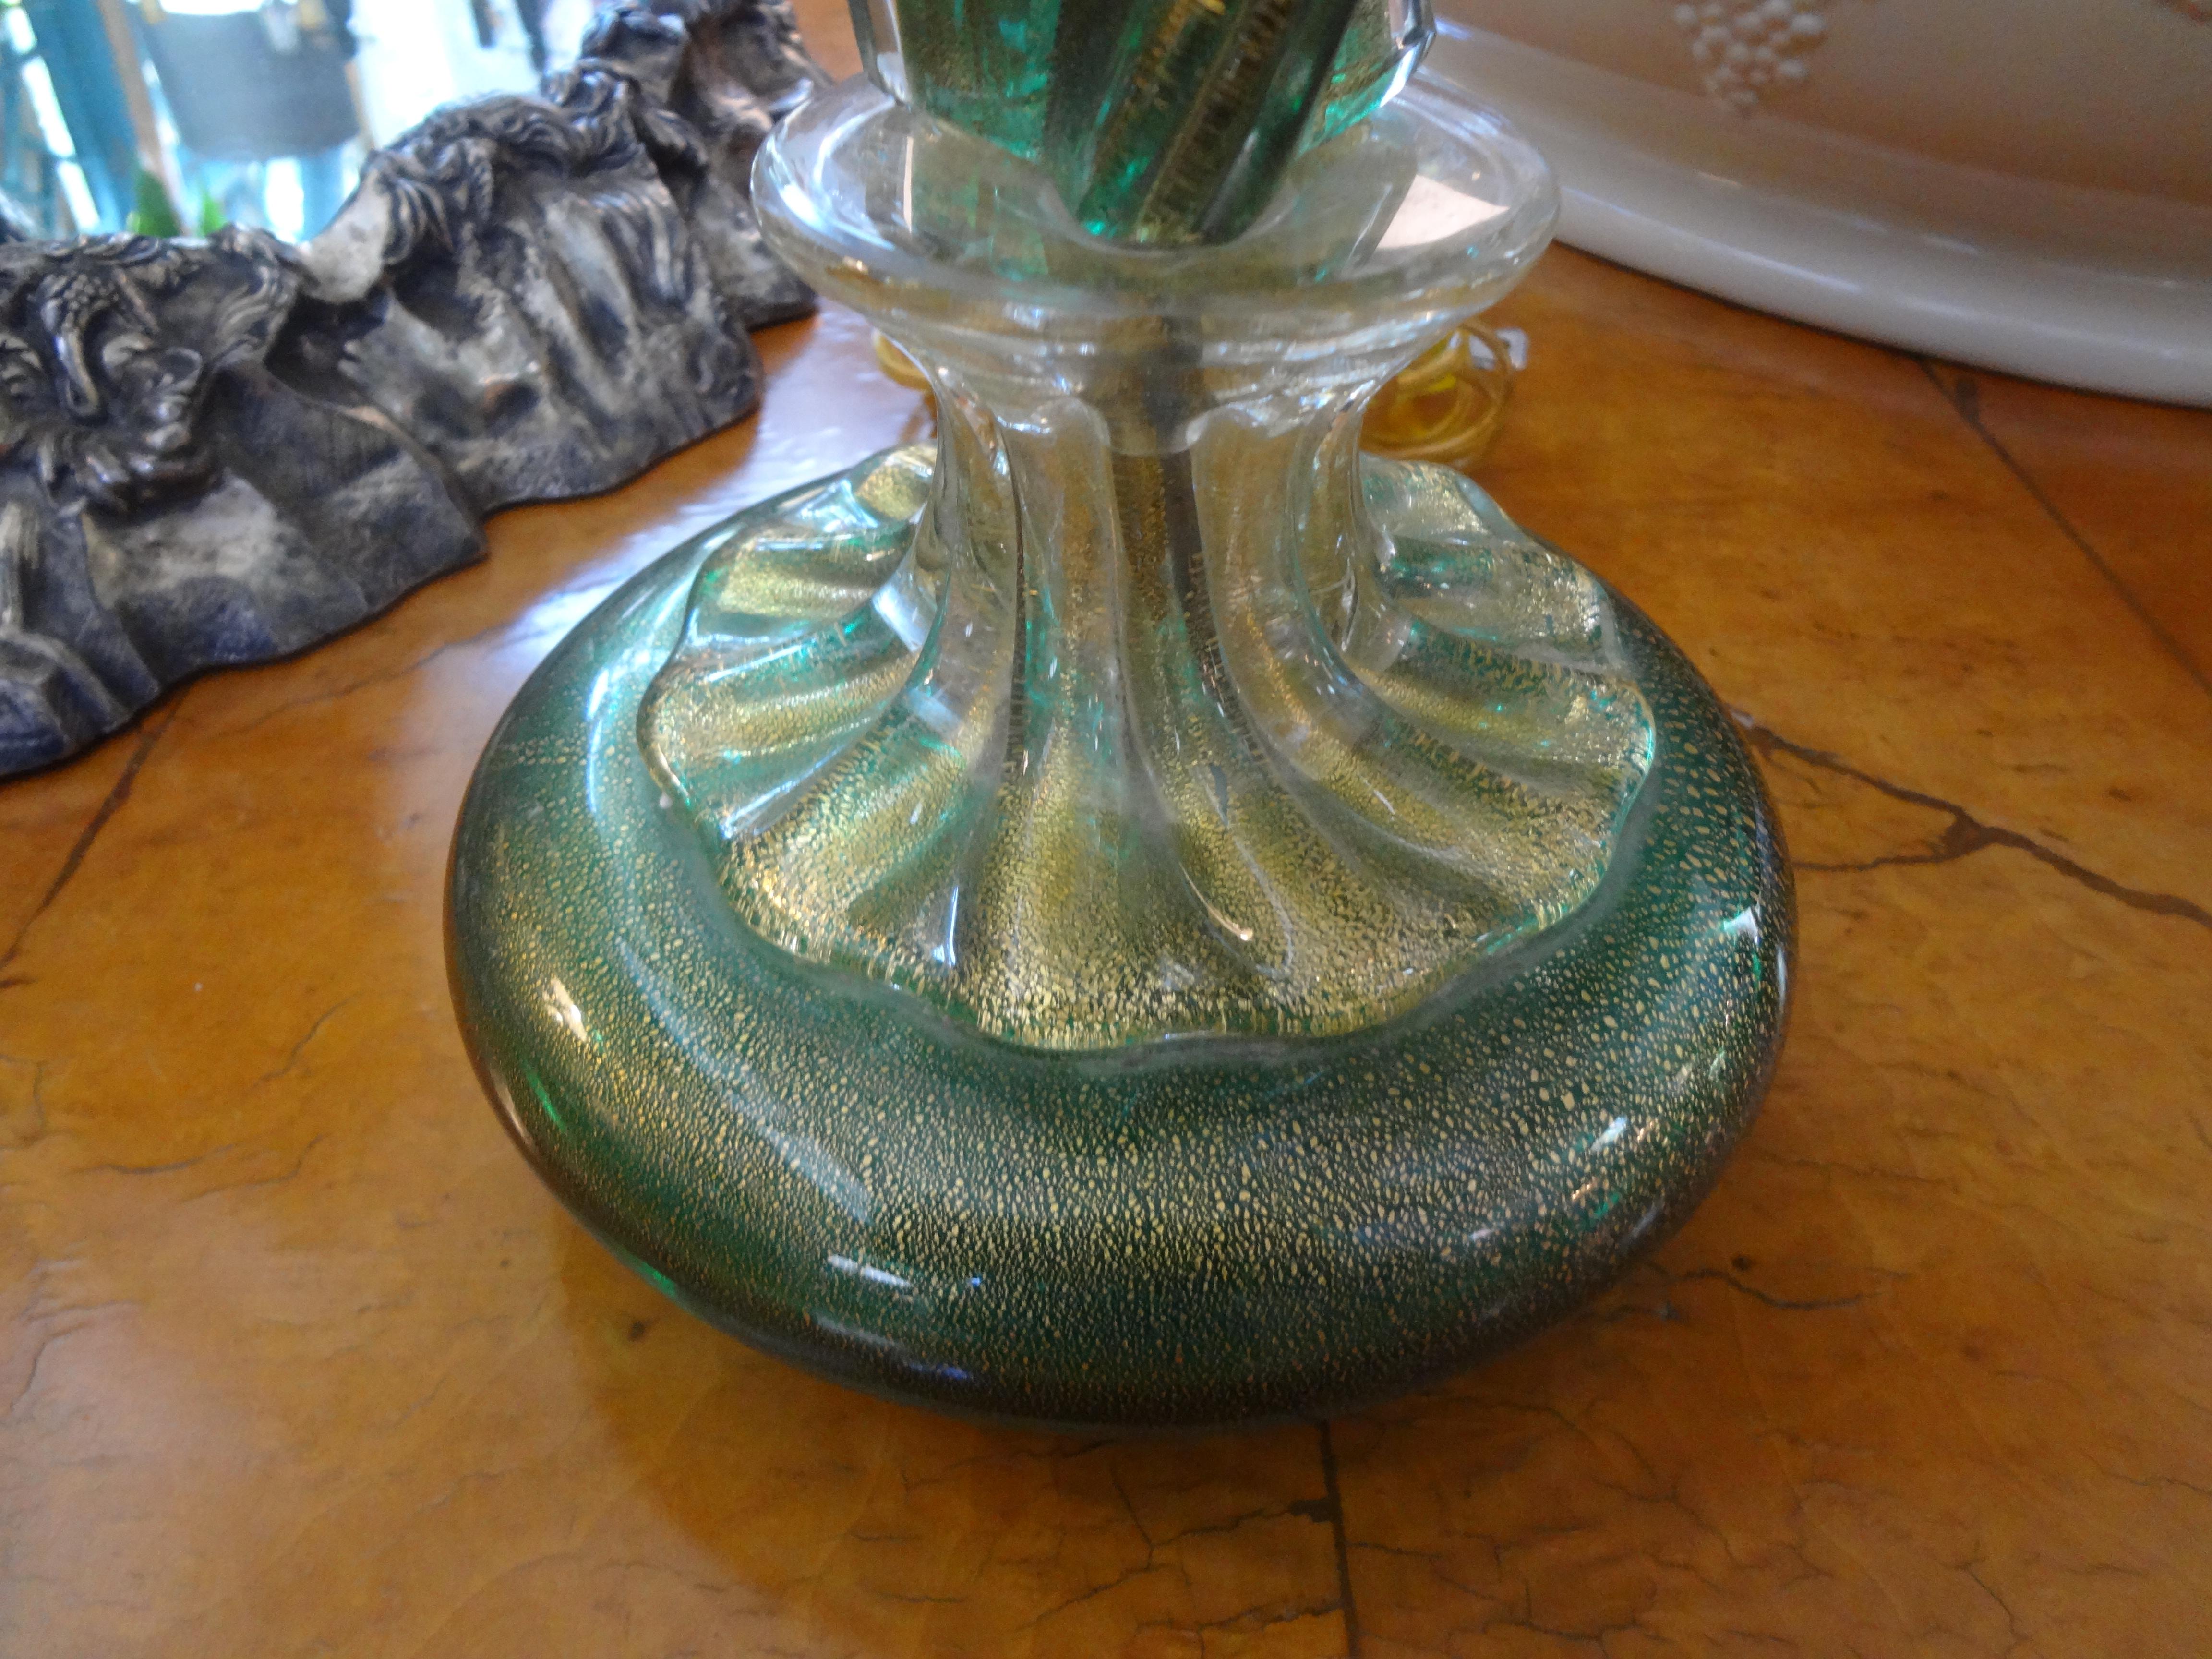 Green and gold Murano glass lamp by Barovier.
Green and gold Murano lamp by Barovier stunning green and gold vintage Murano glass lamp by Barovier & Toso. This beautiful Murano glass lamp with an interesting twisted design has been newly wired and